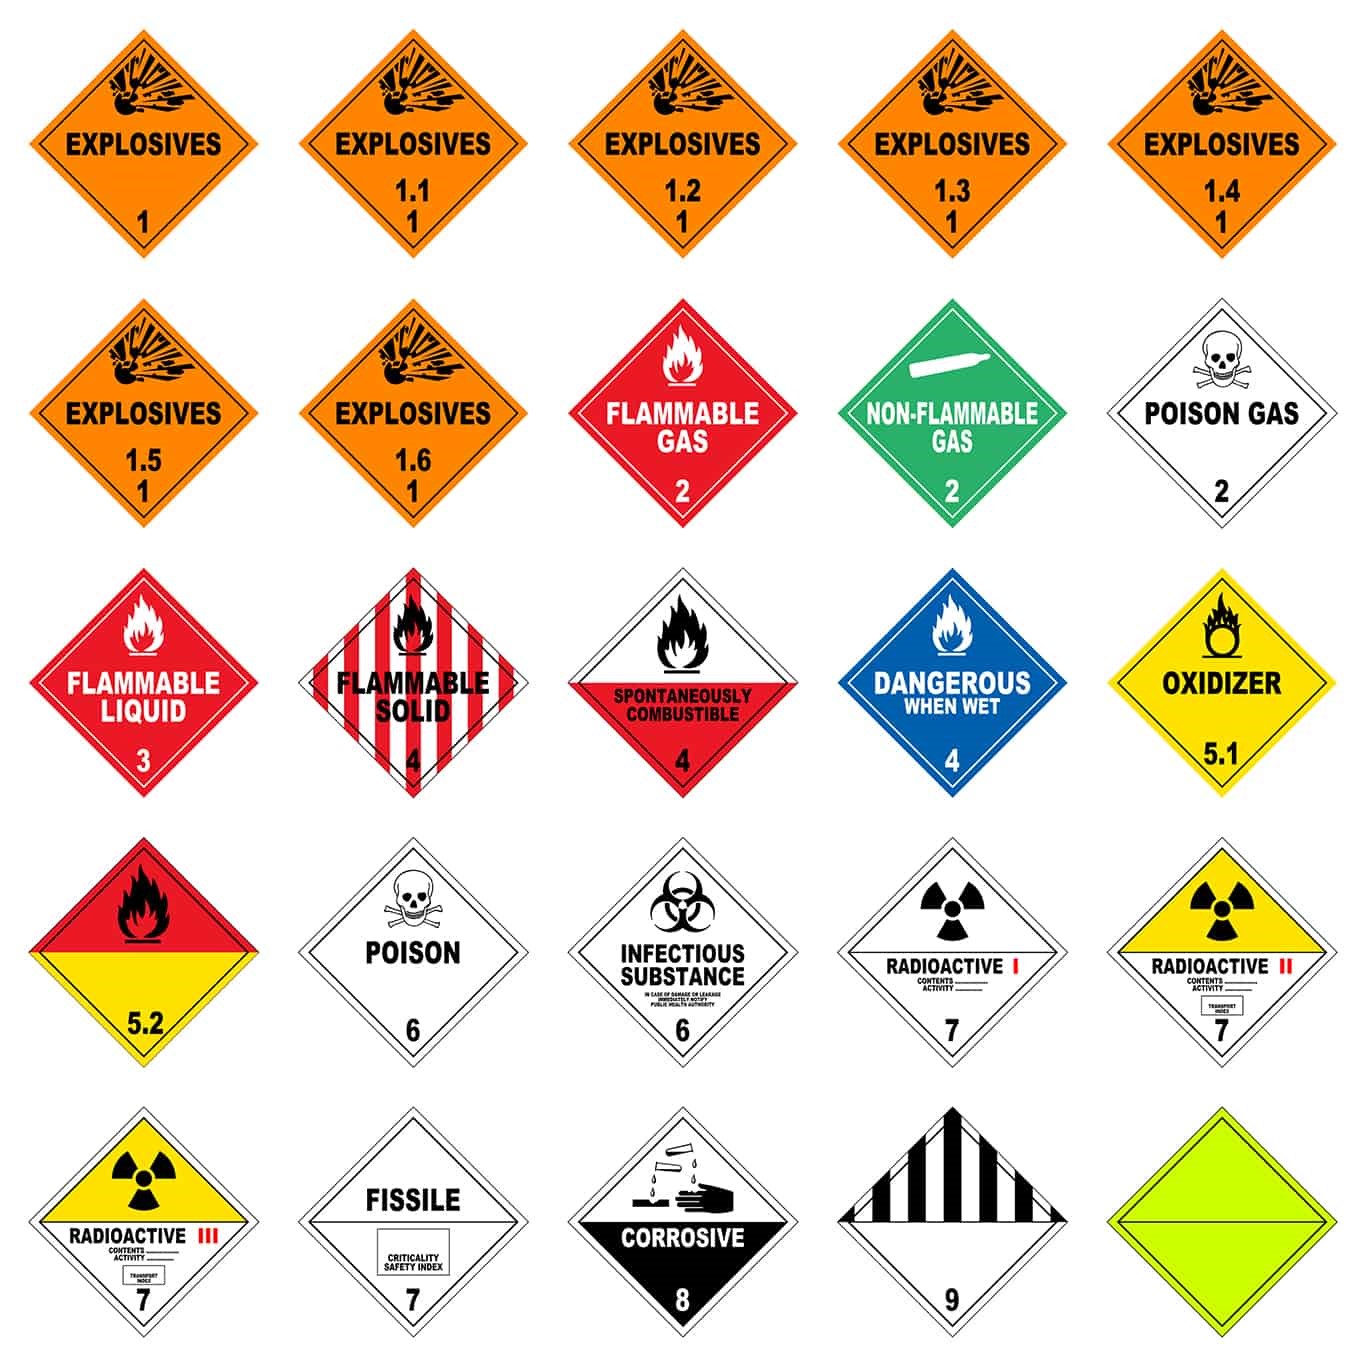 Dangerous Goods Fulfilment and Shipping: A Guide to Safe and Compliant Operations E-PickPack